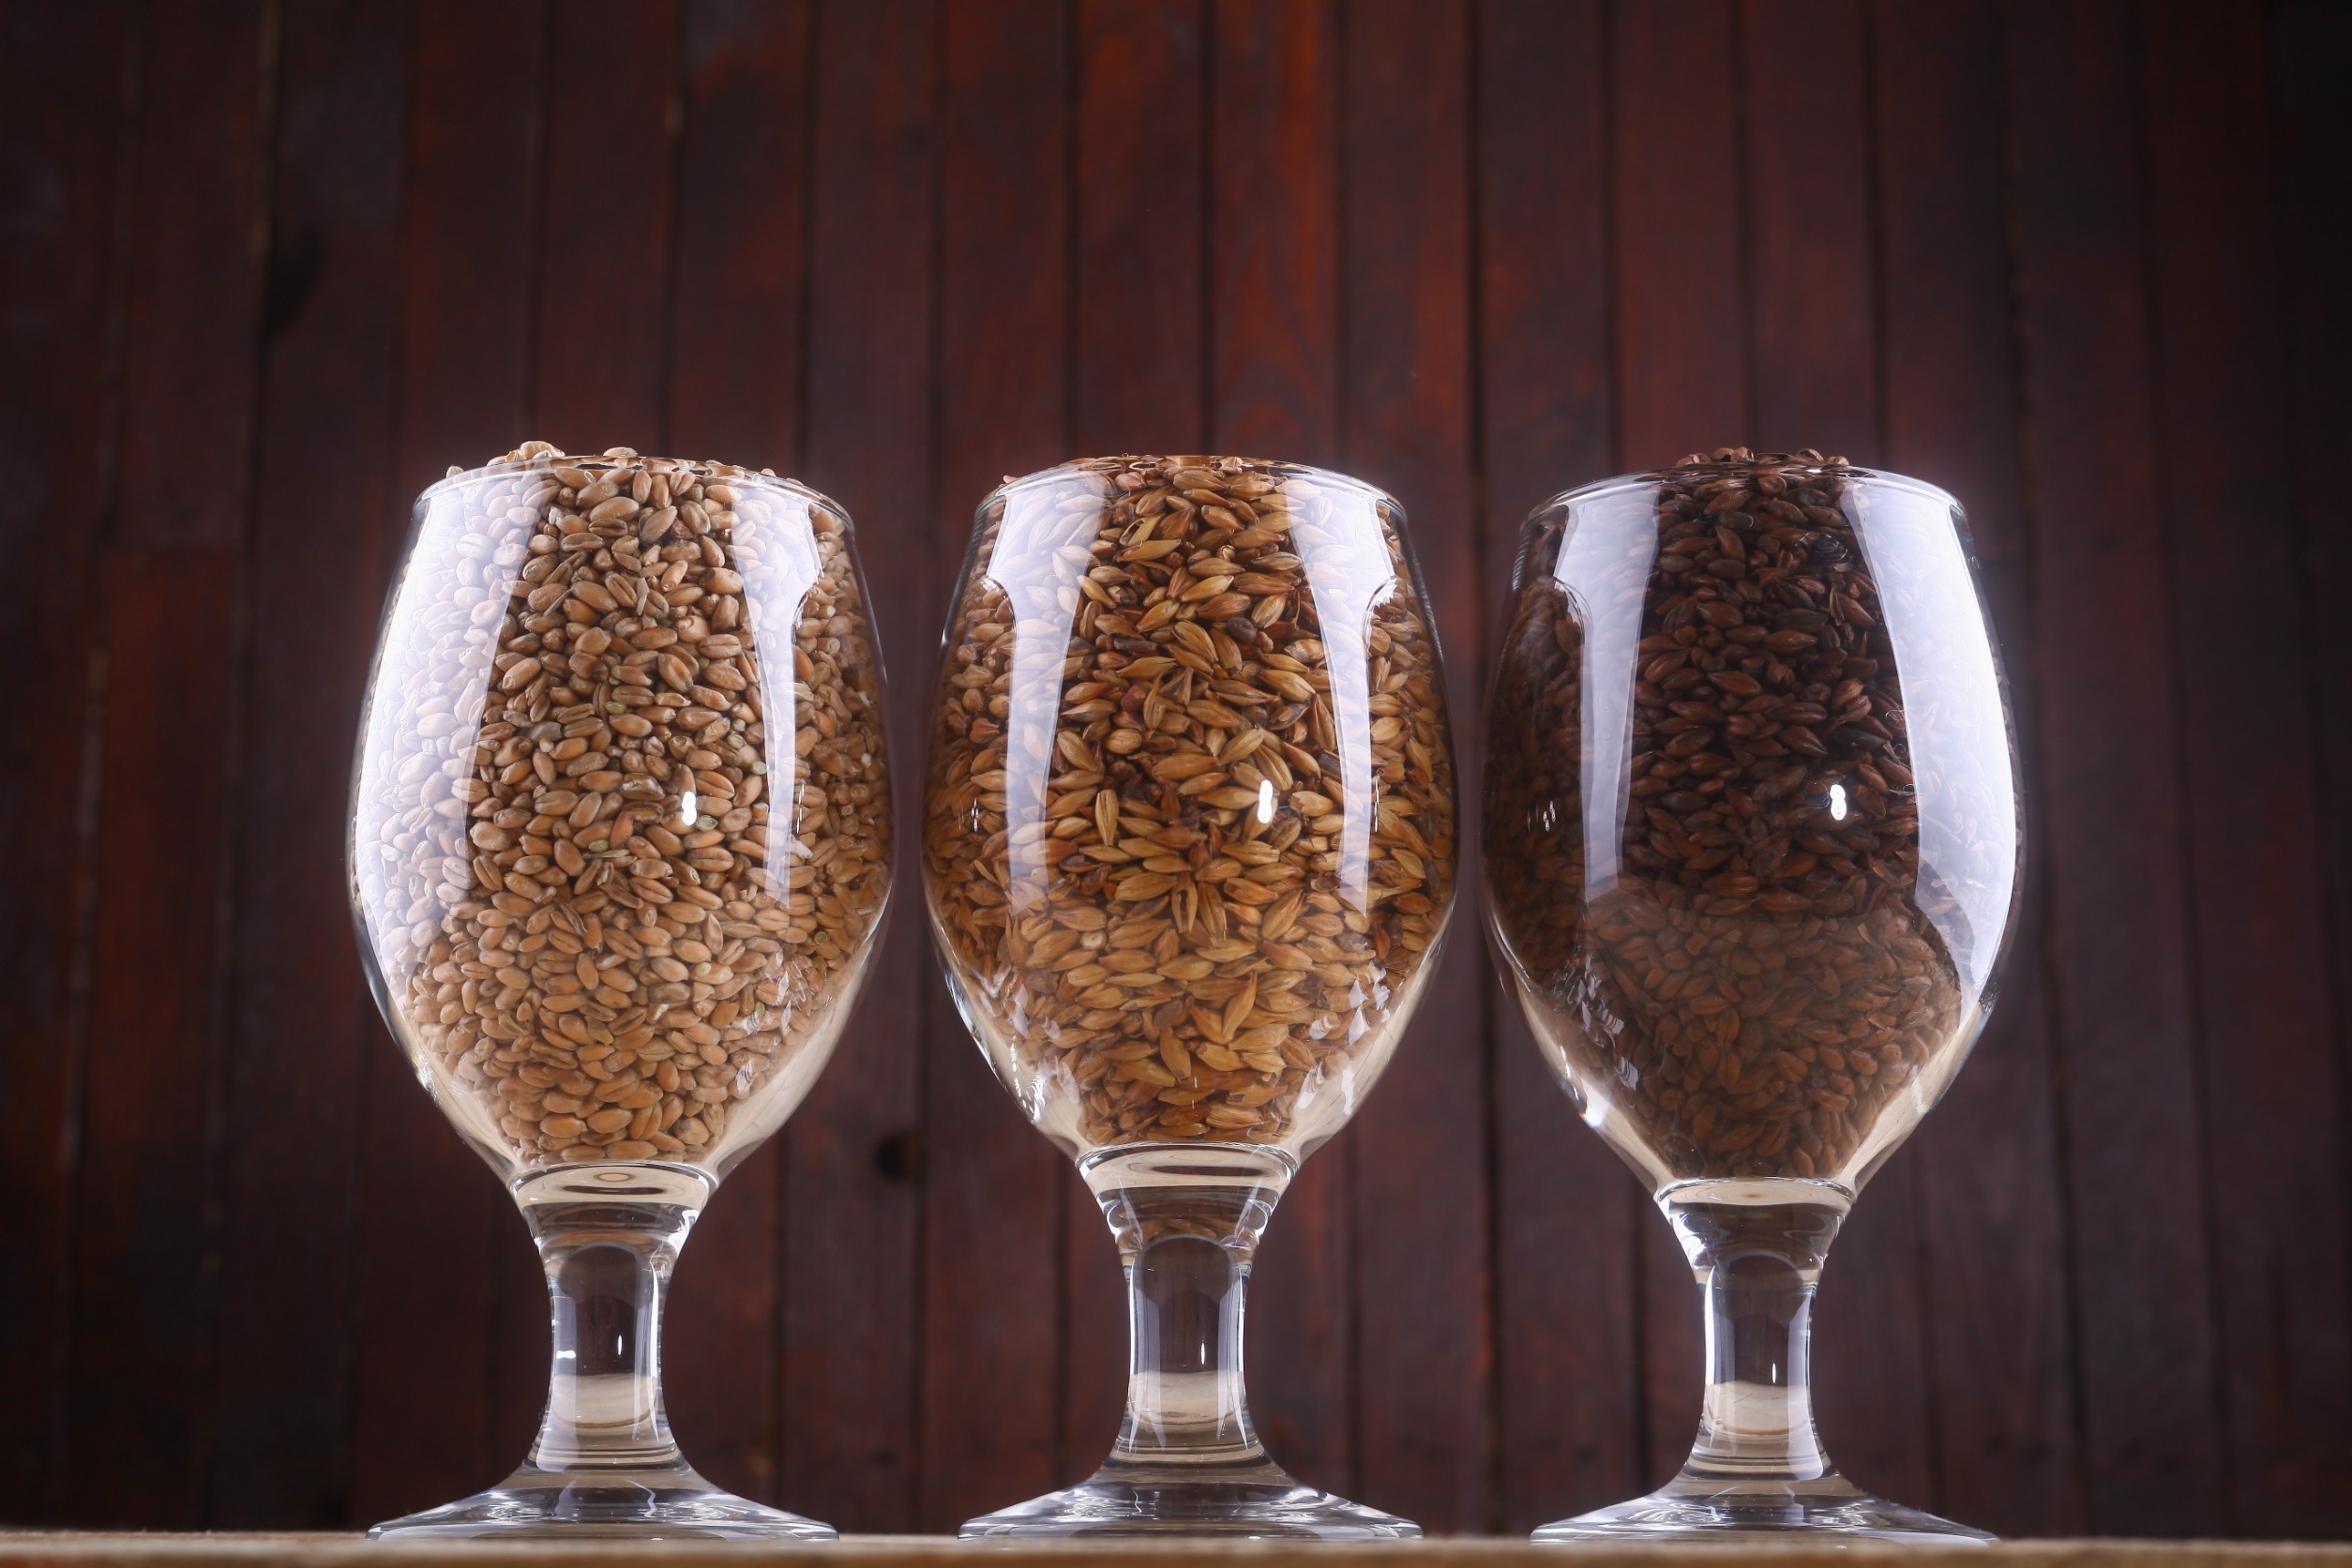 base malts in a glass on a black background.